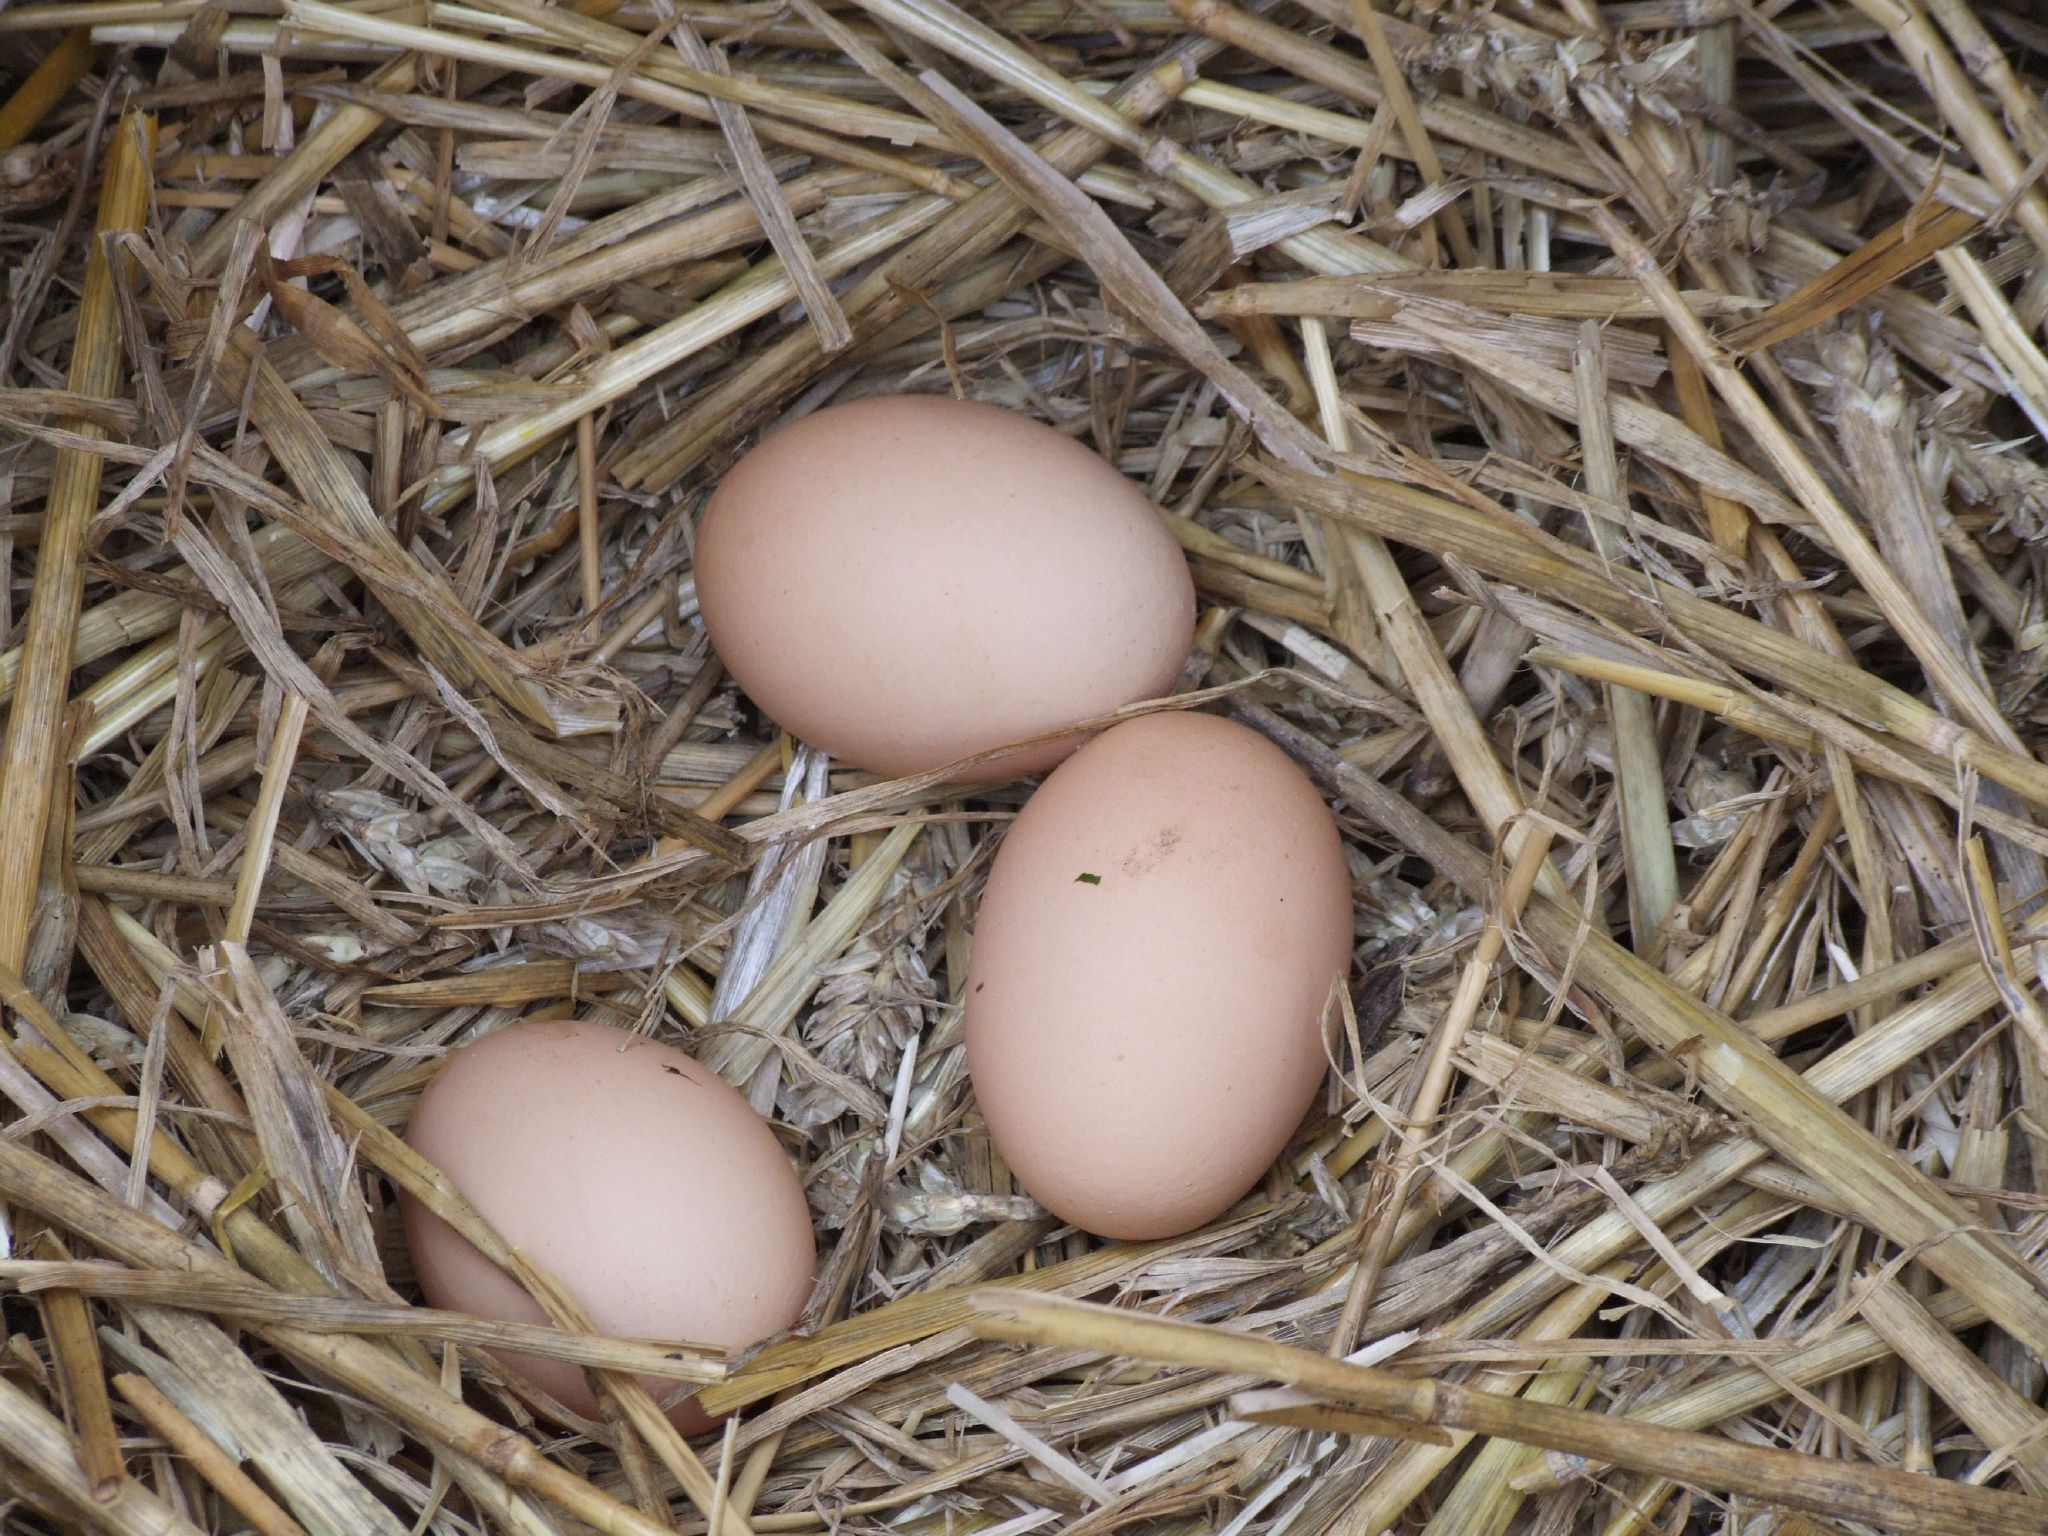 three eggs in some hay are lying together